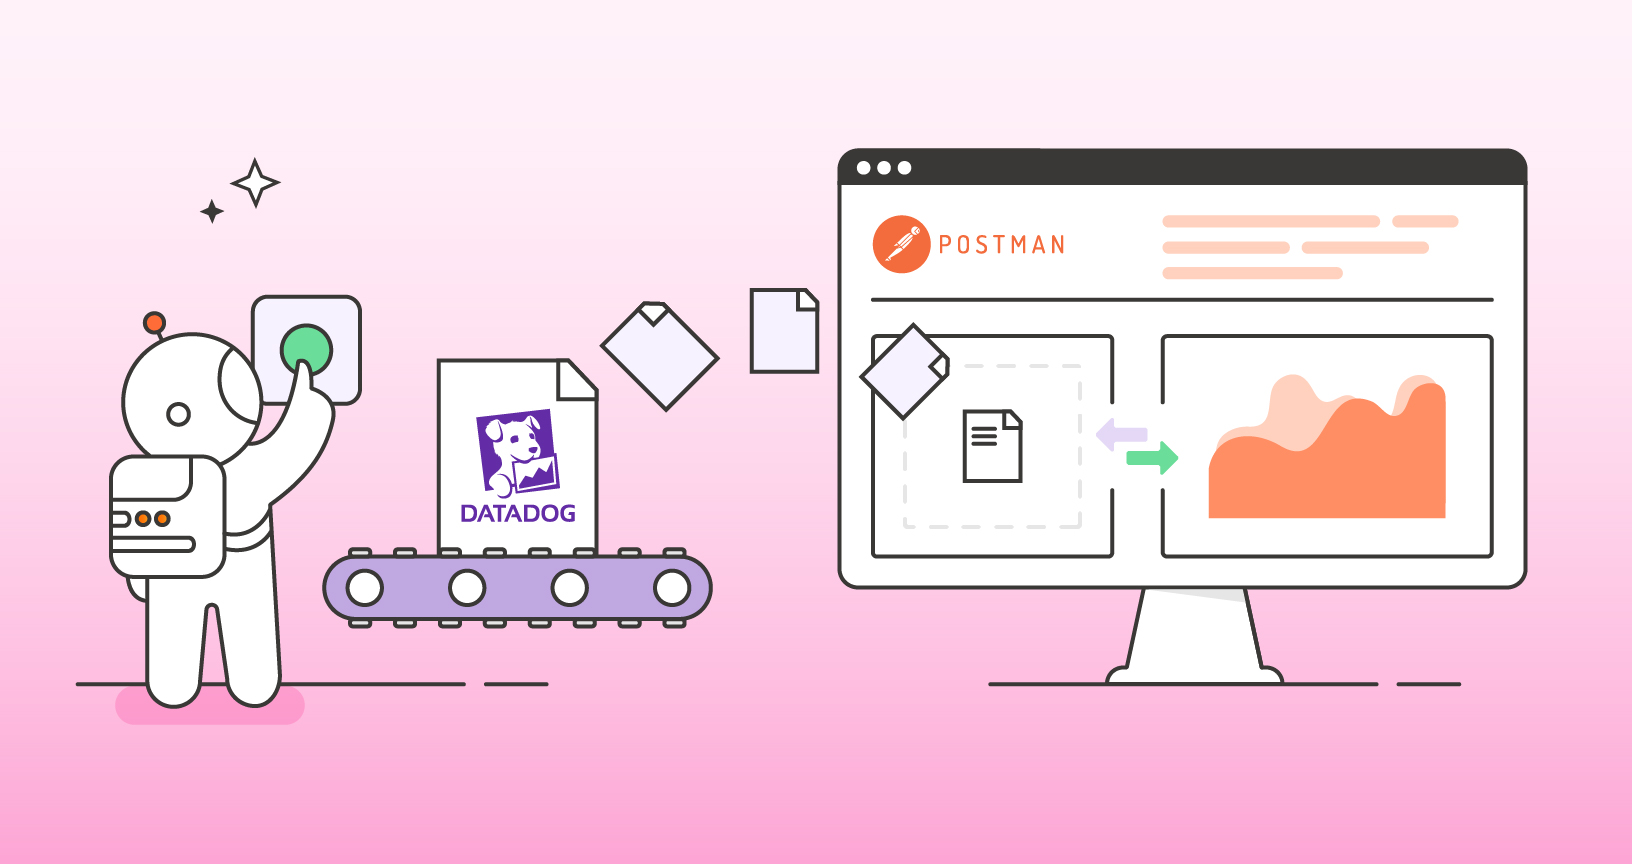 Converting DataDog Synthetic Tests to Postman Collections